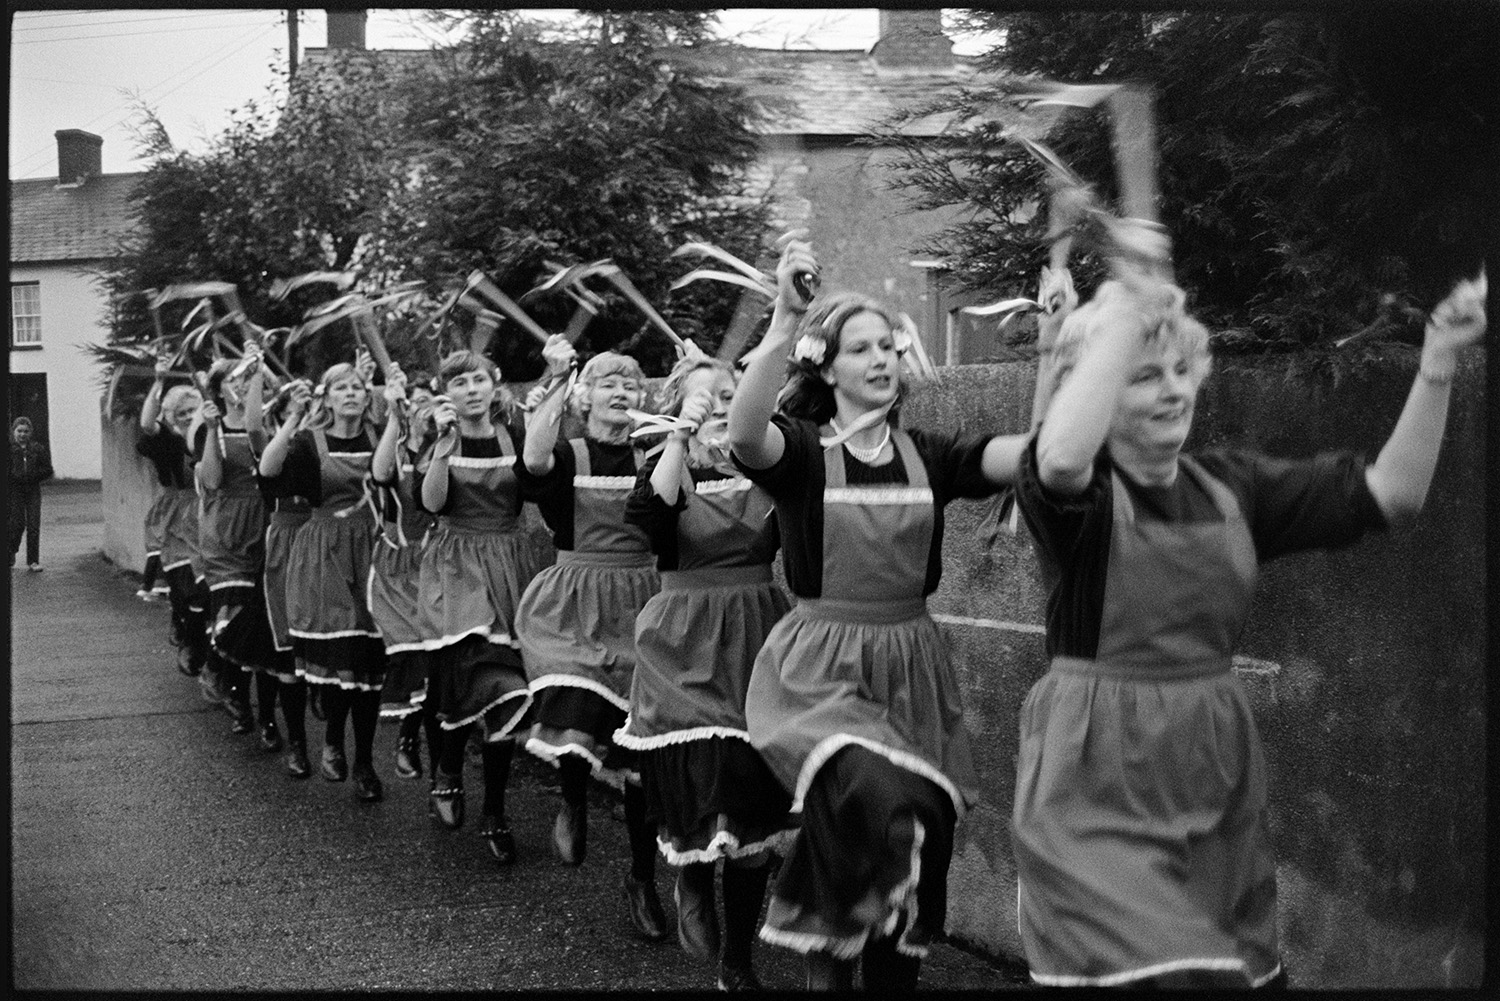 Women's Clog Dancing team at village carnival. 
[A group of women clog dancers performing in a line on a street at Dolton Carnival. They are waving batons with bells.]